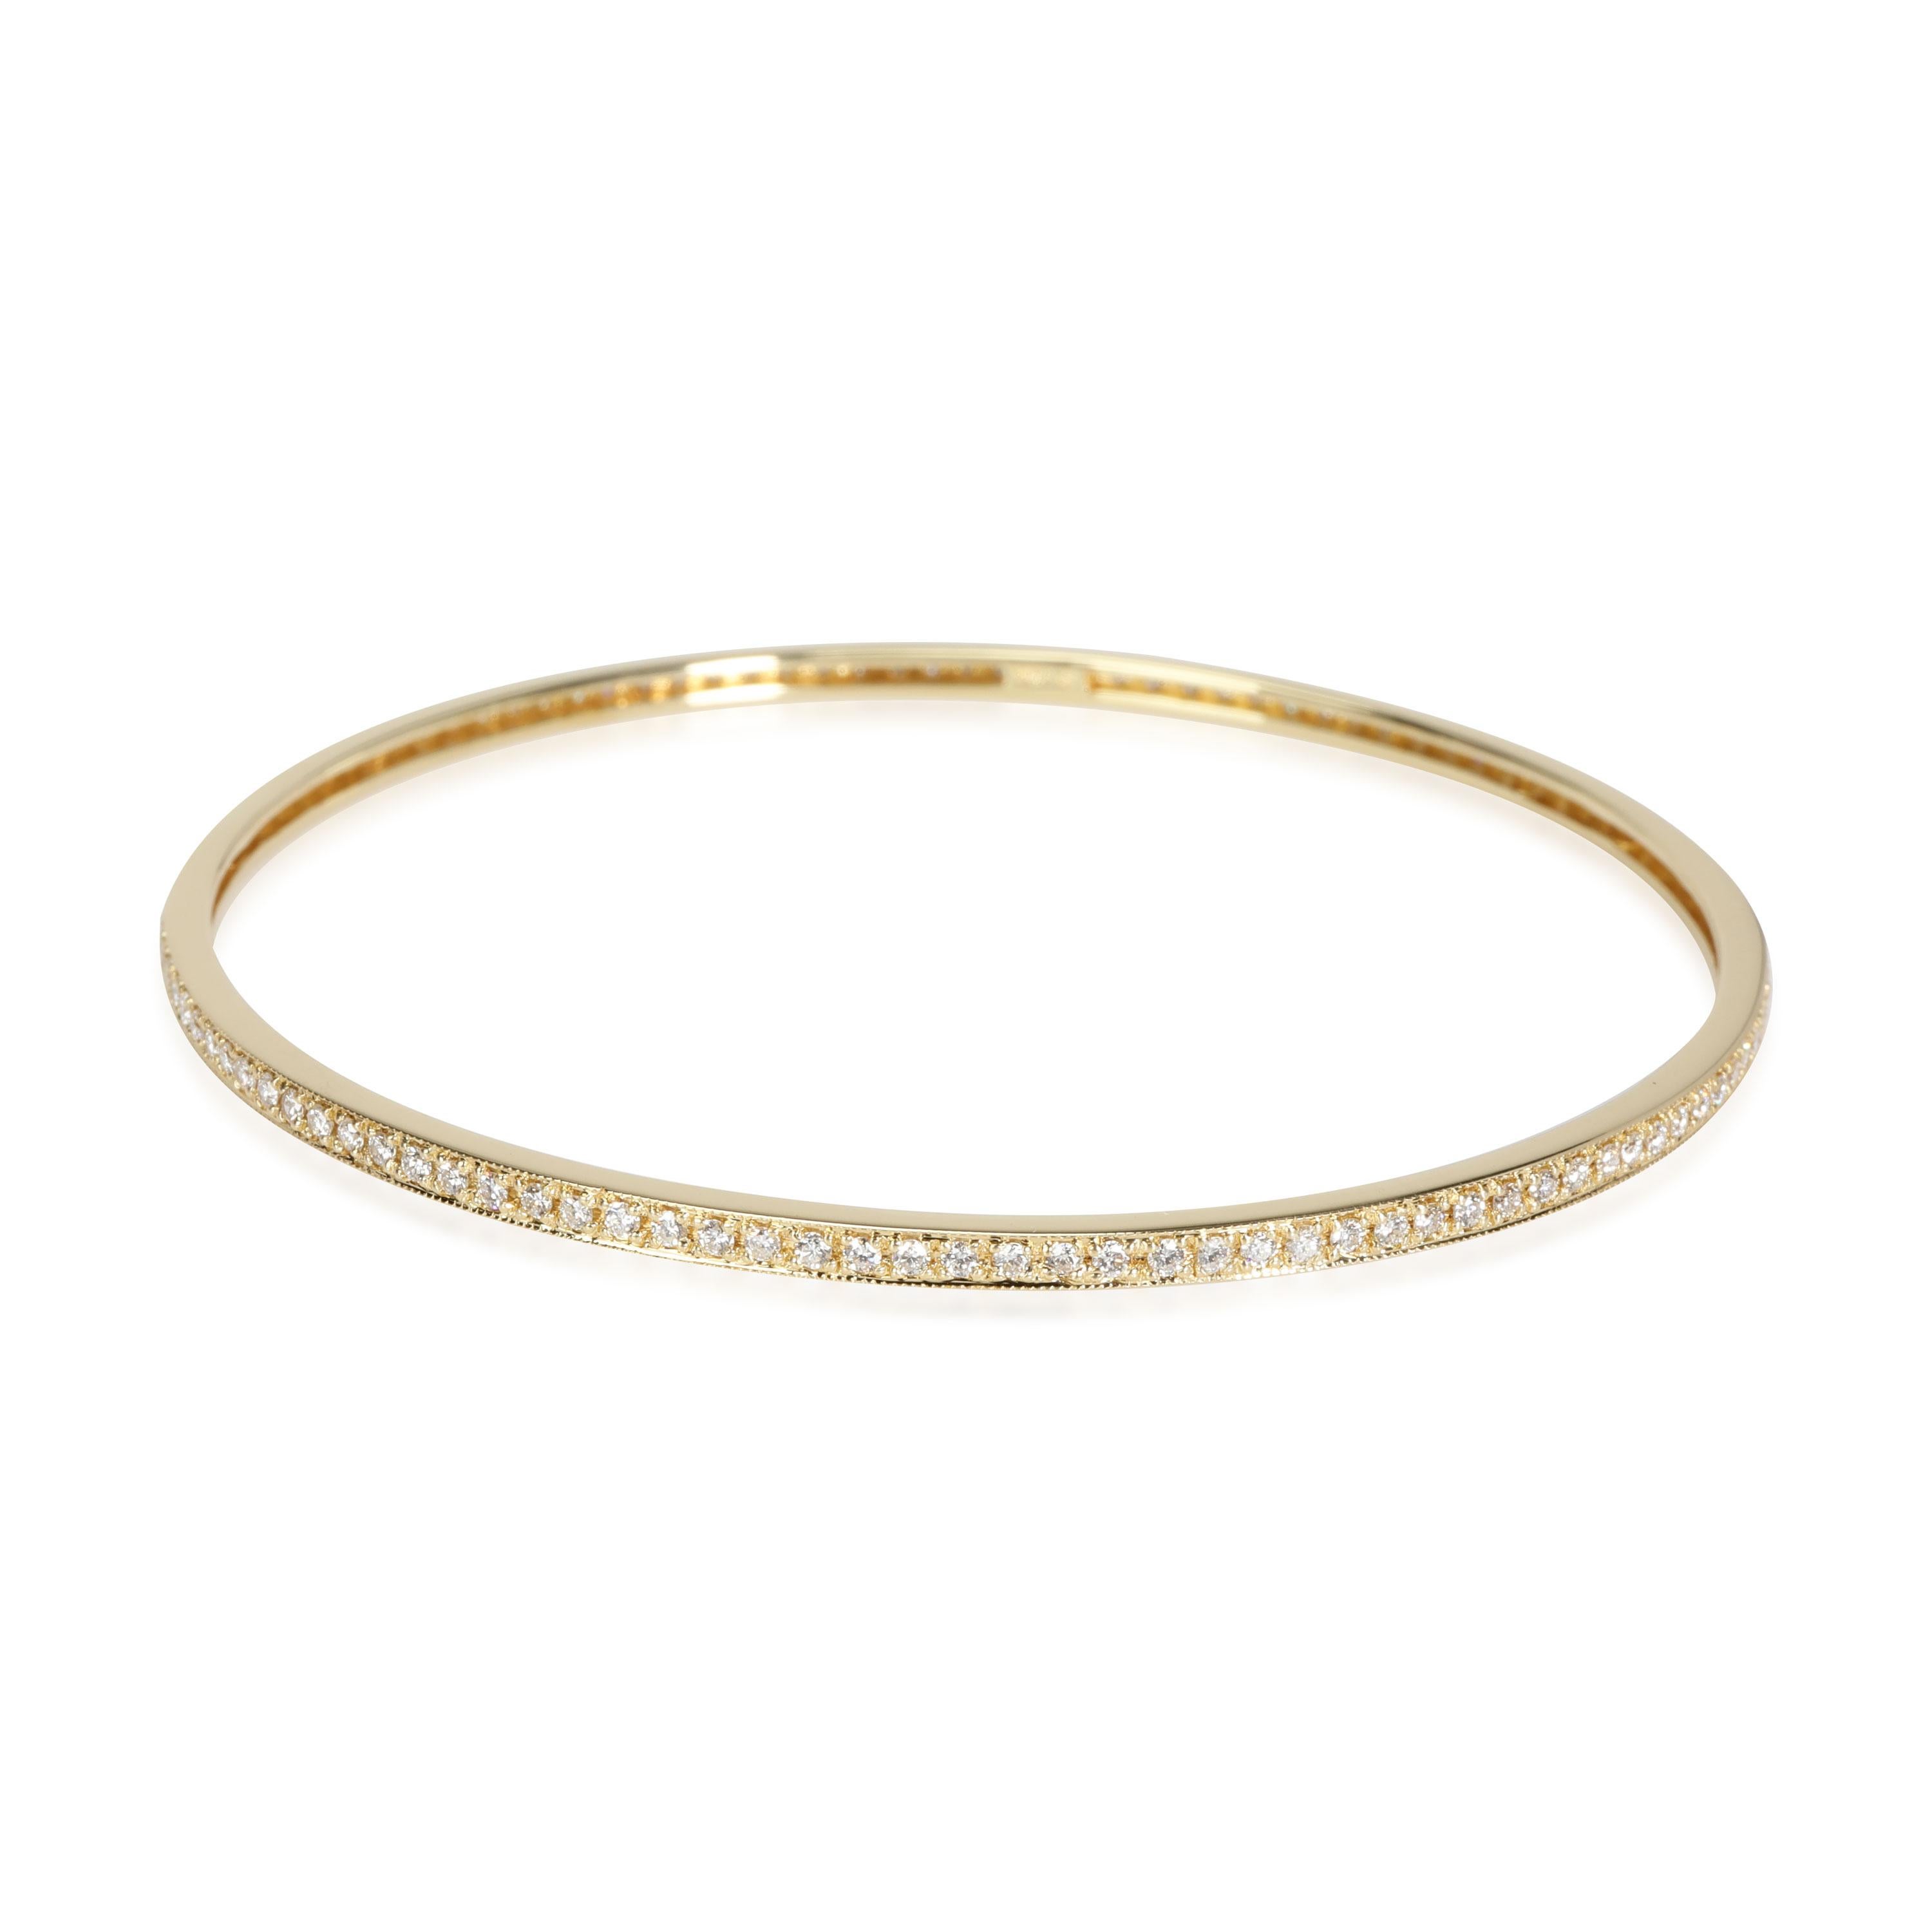 Diamond Slip On Bangle in 18k Yellow Gold 1.75 CTW

PRIMARY DETAILS
SKU: 117280
Listing Title: Diamond Slip On Bangle in 18k Yellow Gold 1.75 CTW
Condition Description: Retails for 2995 USD. In excellent condition and recently polished. Fits a 7.5